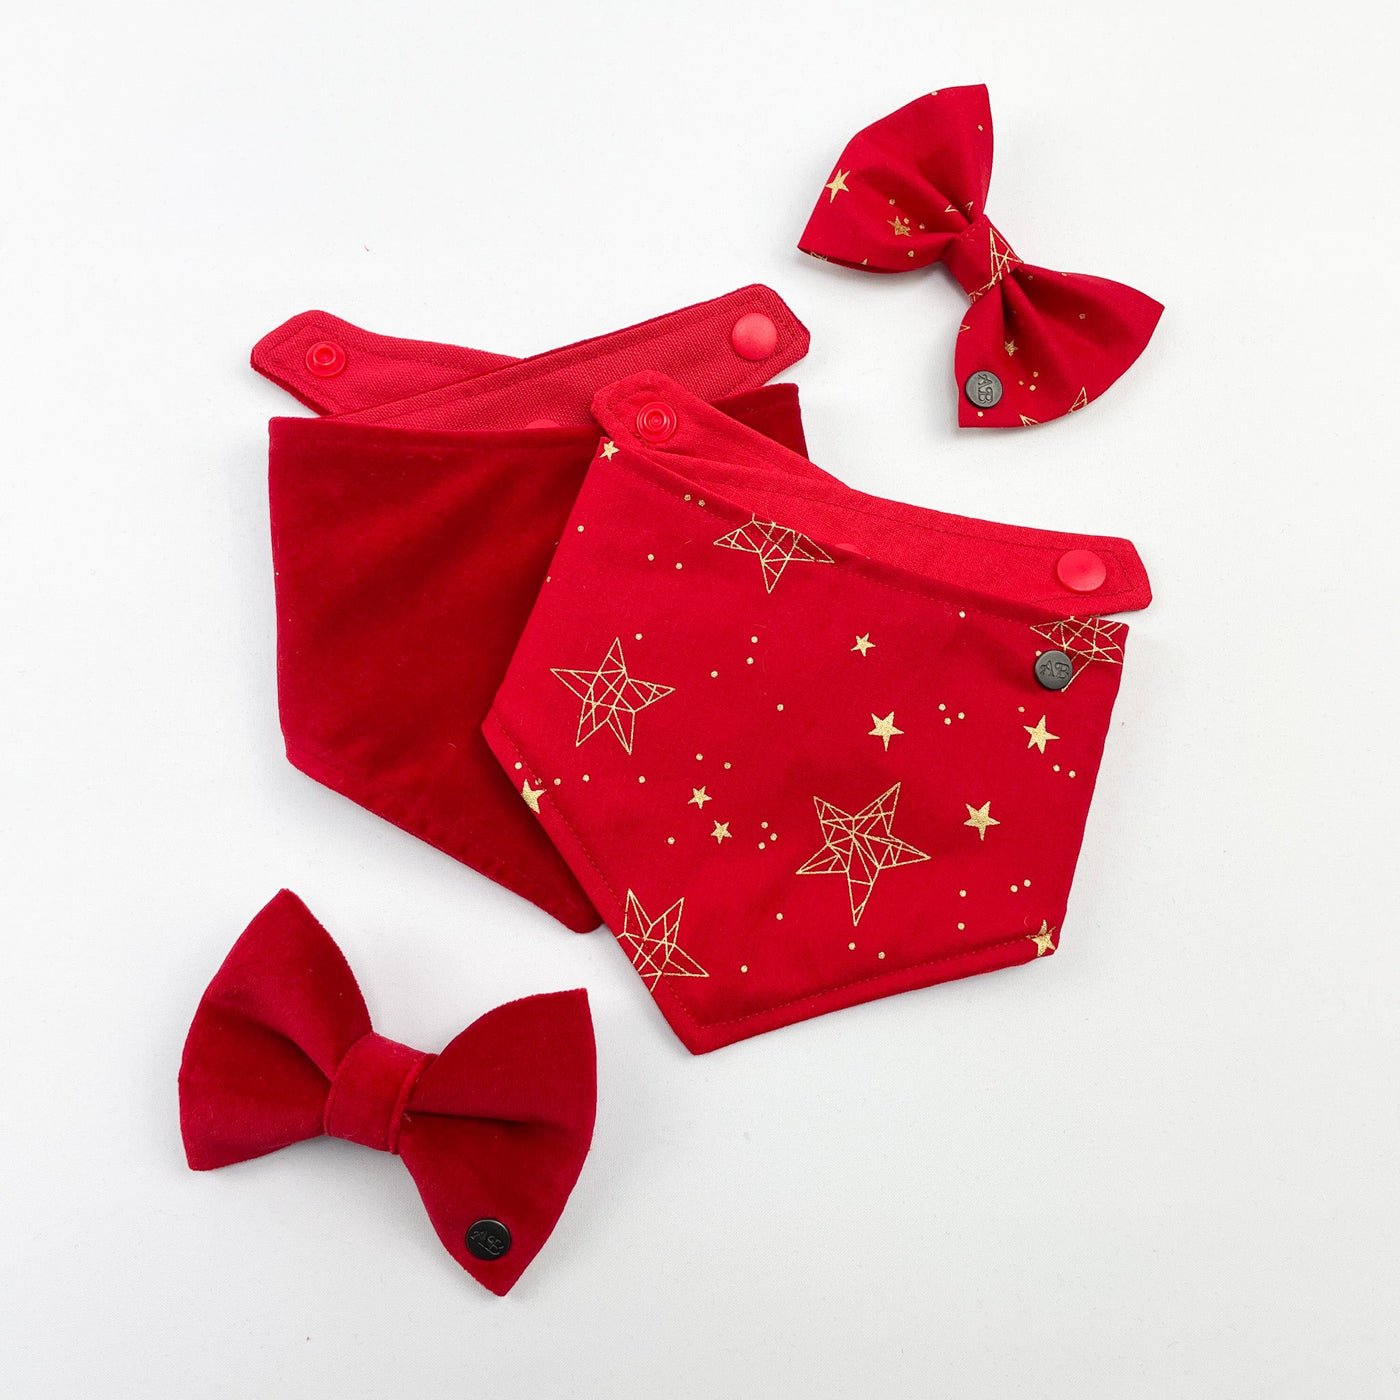 Red Star dog bow tie, Red Star dog bandanas and red velvet bow tie collection